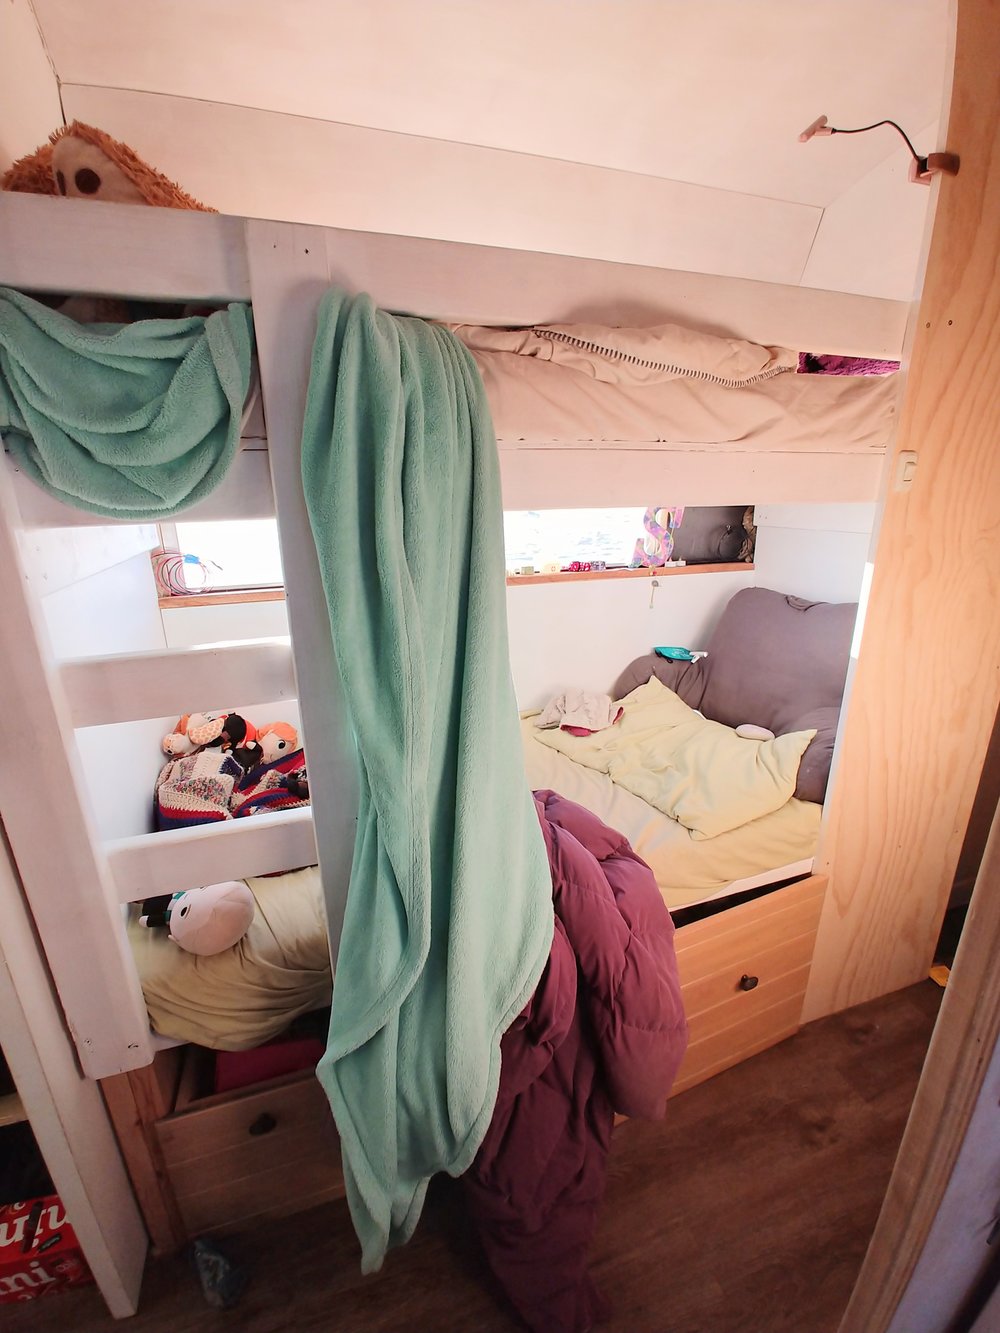 Bunk Bed Bedding Deliberate Life, How To Put Sheets On A Bunk Bed